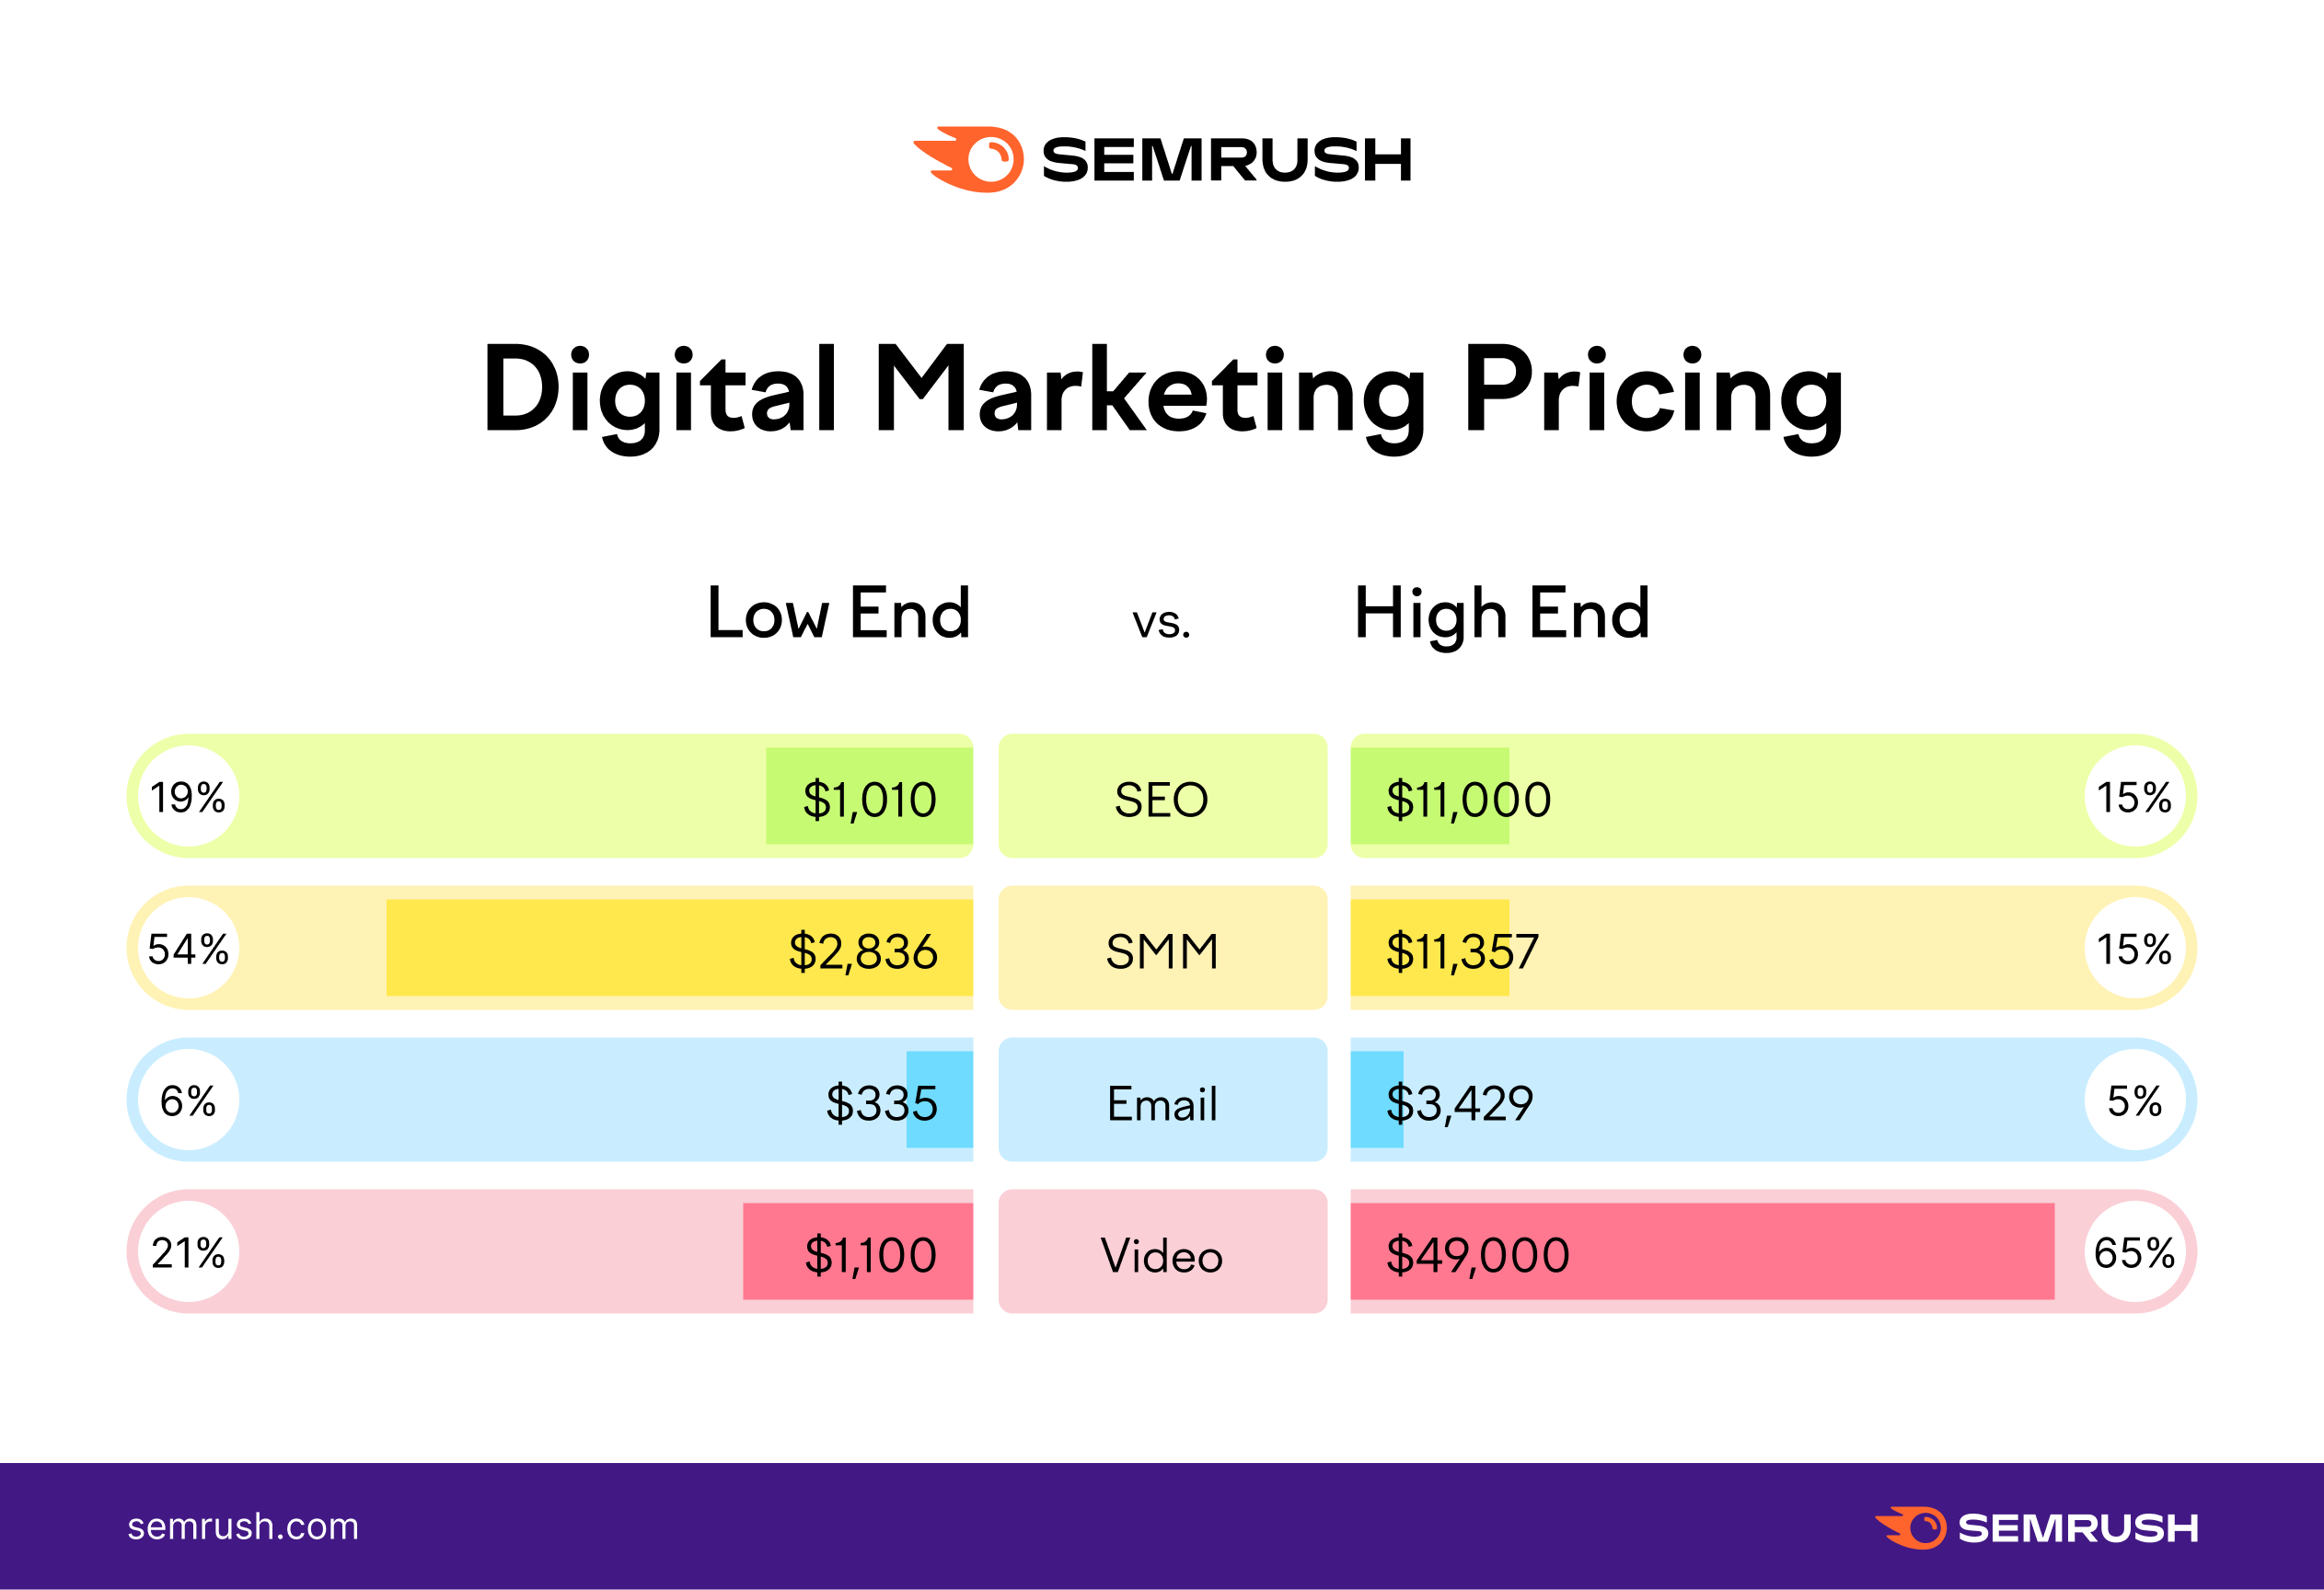 Digital Marketing Agency Pricing: Are You Charging Enough for Your